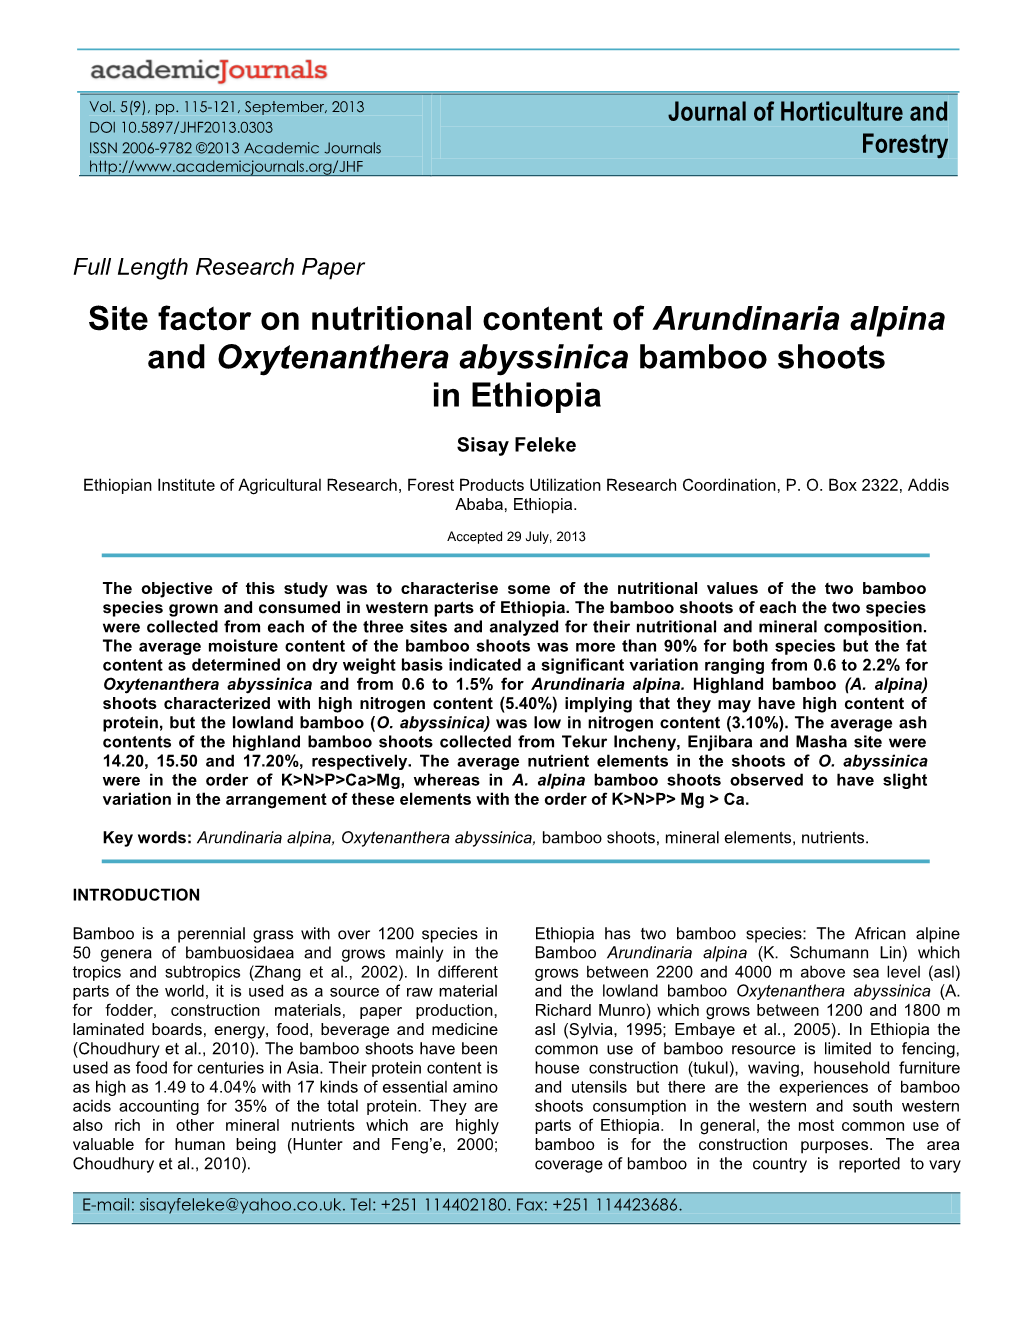 Site Factor on Nutritional Content of Arundinaria Alpina and Oxytenanthera Abyssinica Bamboo Shoots in Ethiopia